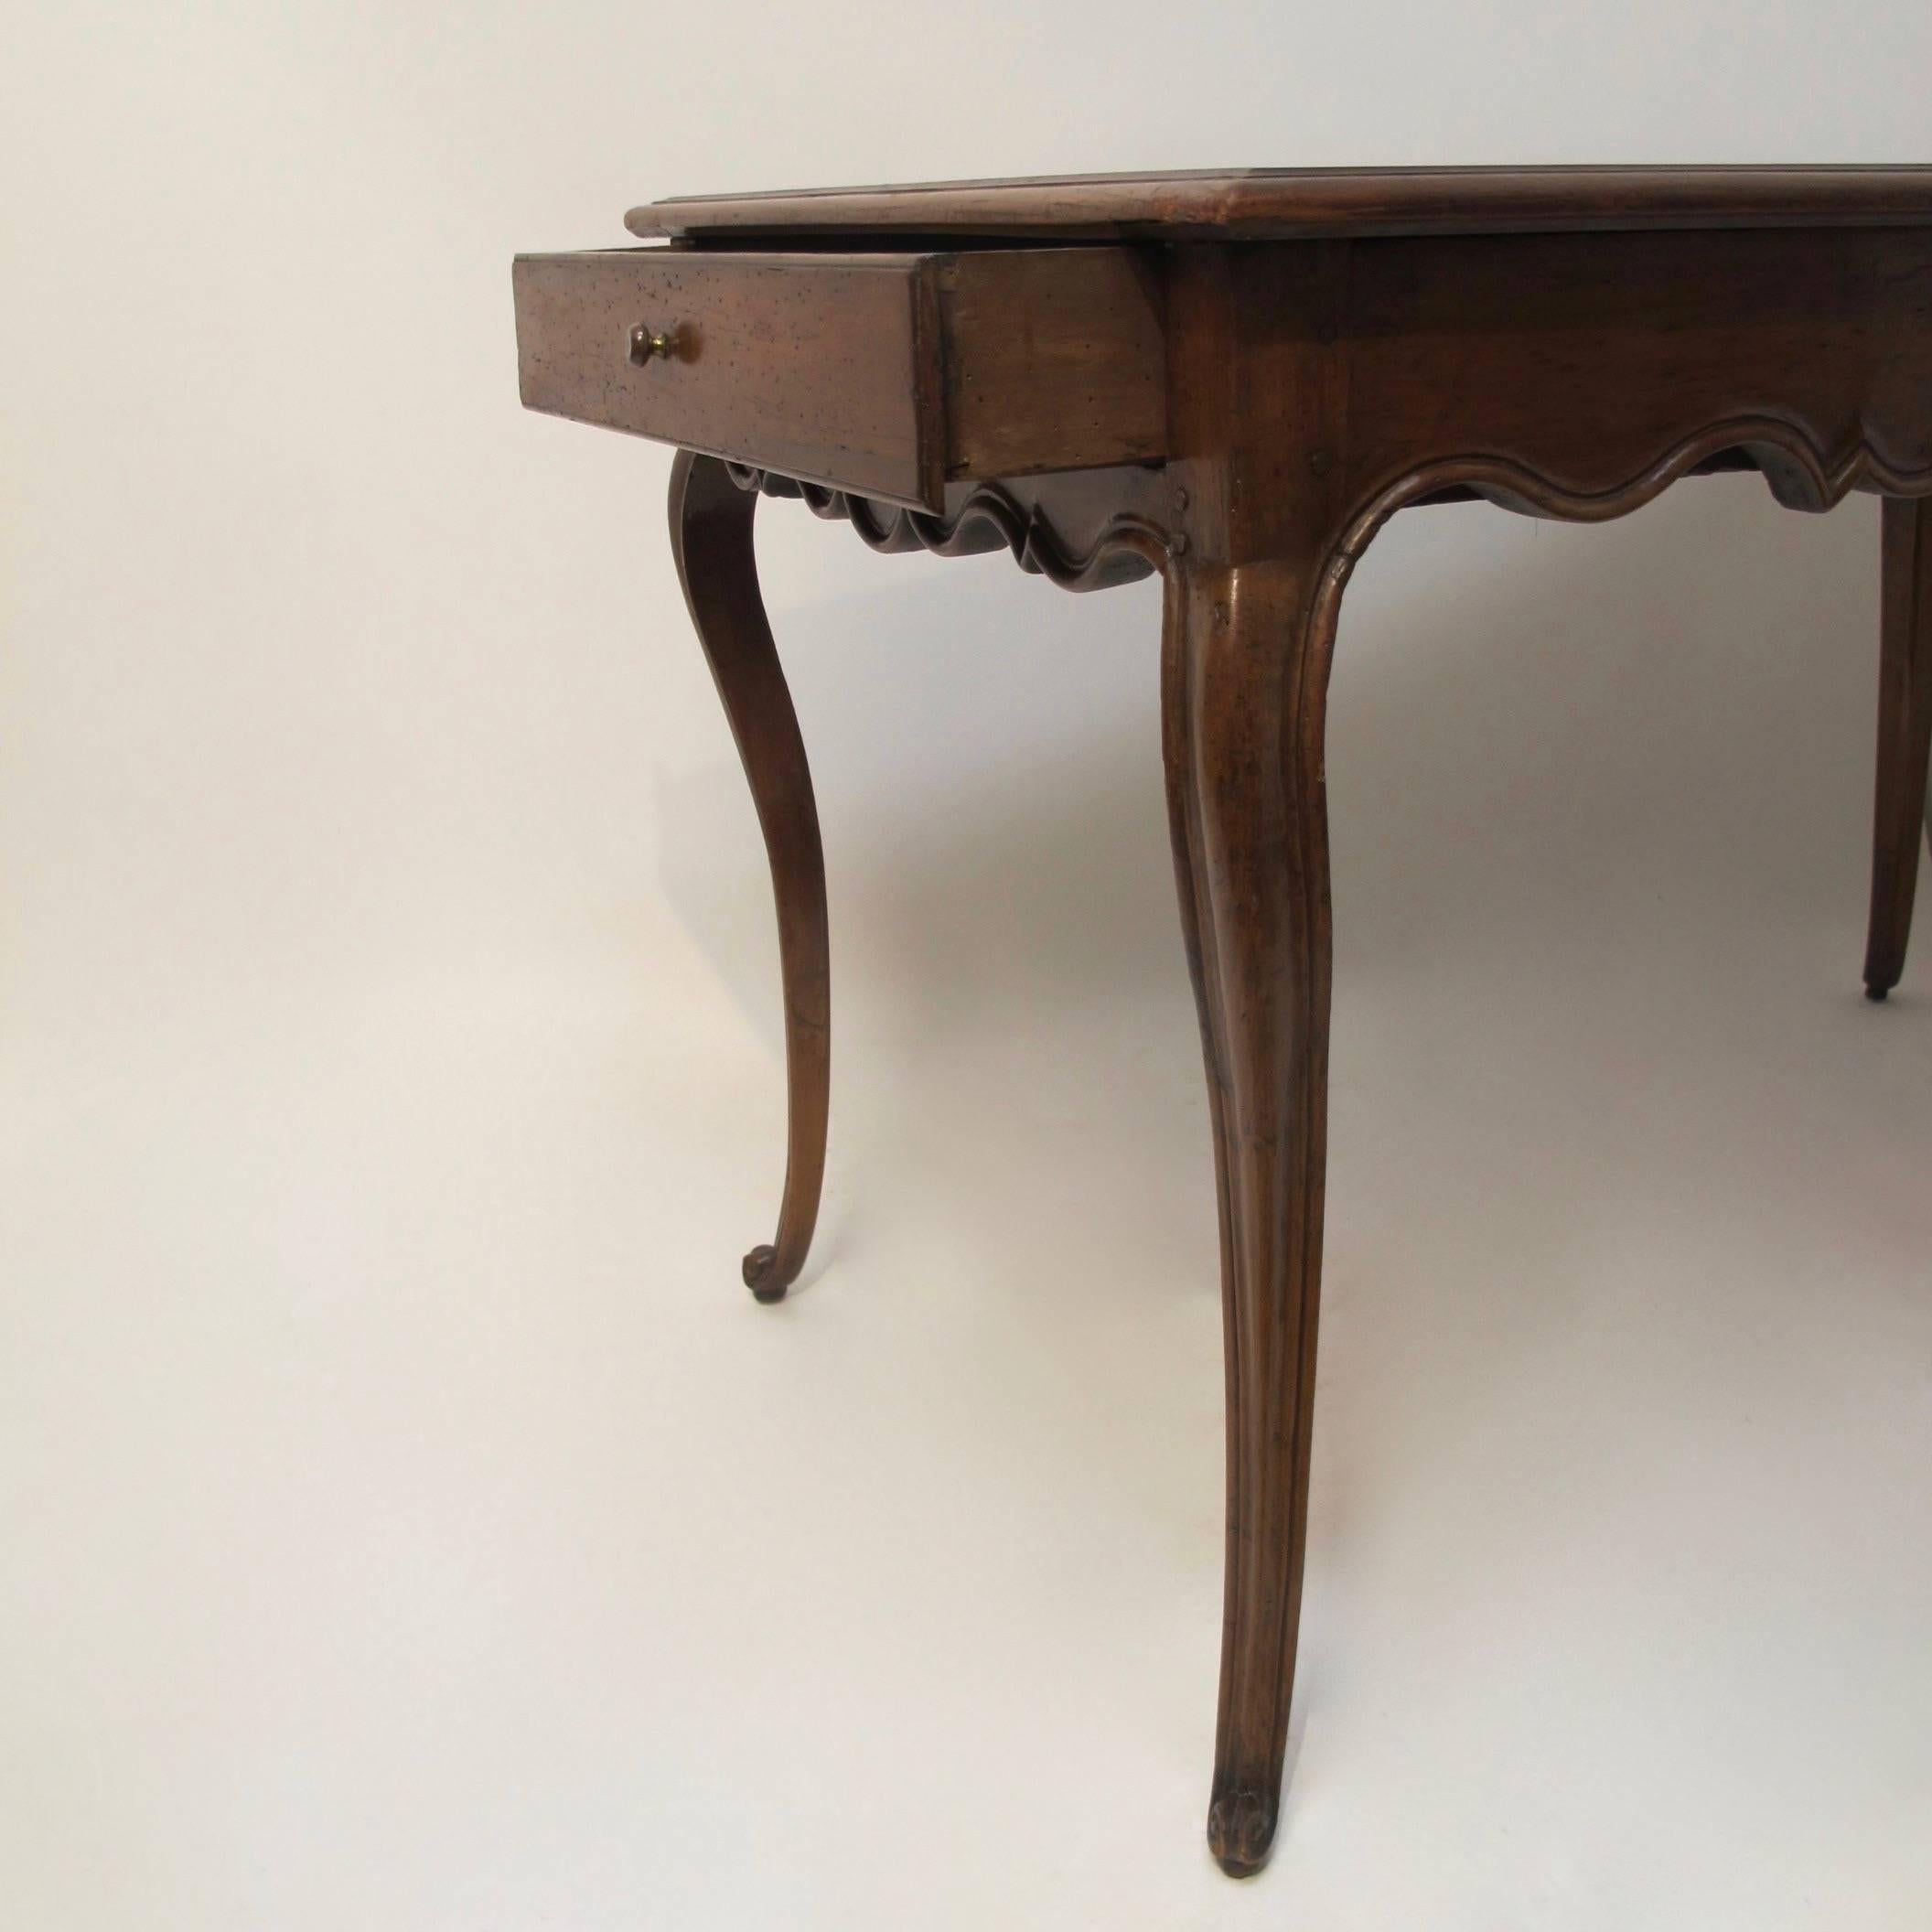 Louis XVI Walnut Writing Table Desk with Inset Leather, French 18th Century